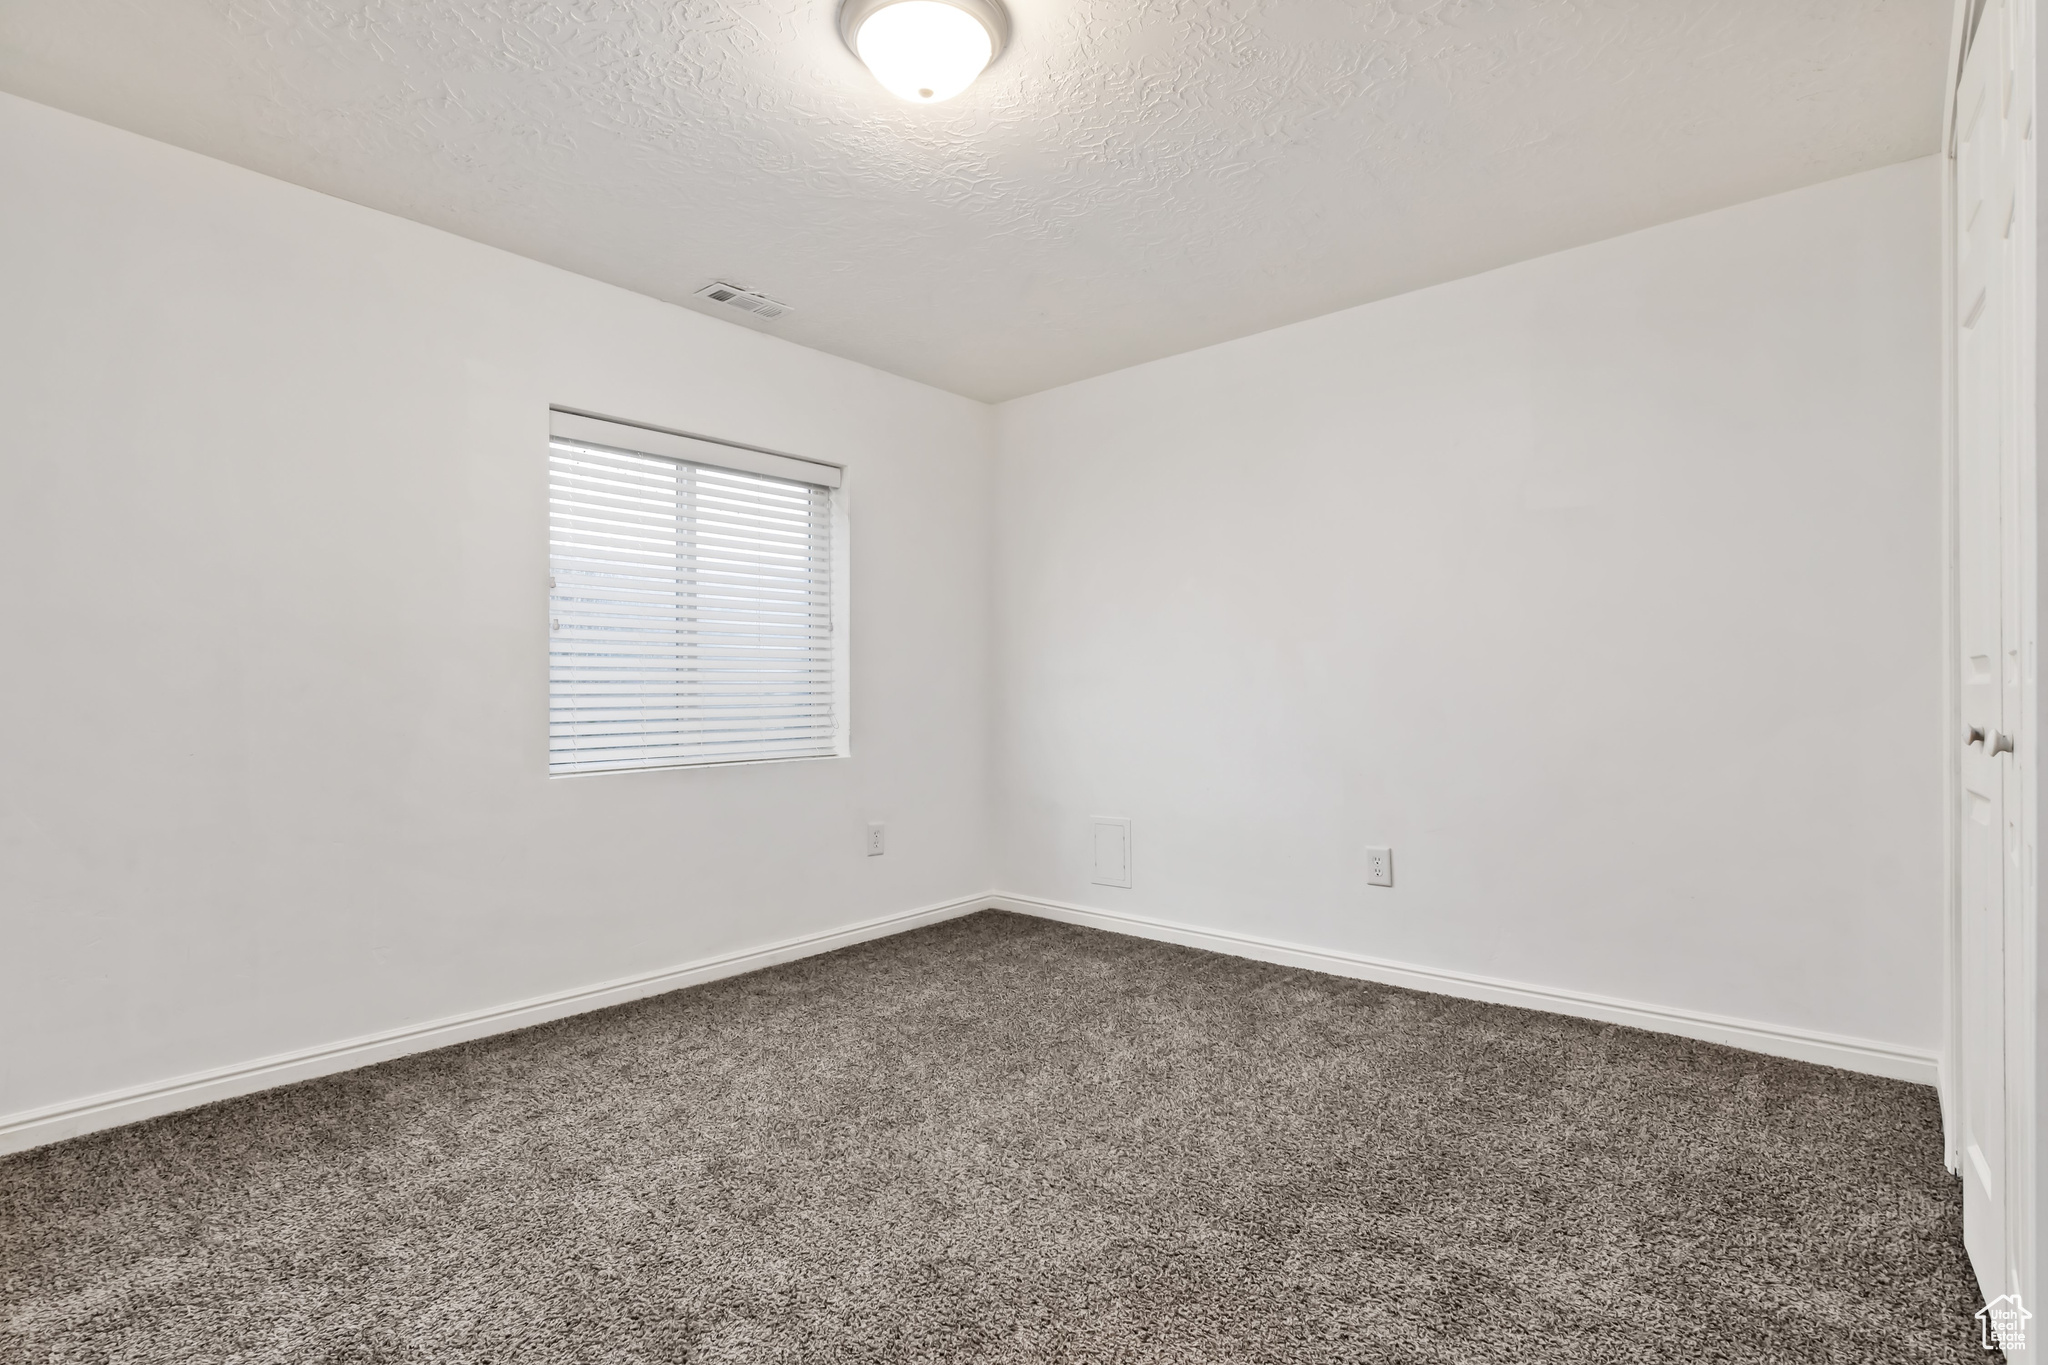 Unfurnished room featuring a textured ceiling and dark carpet